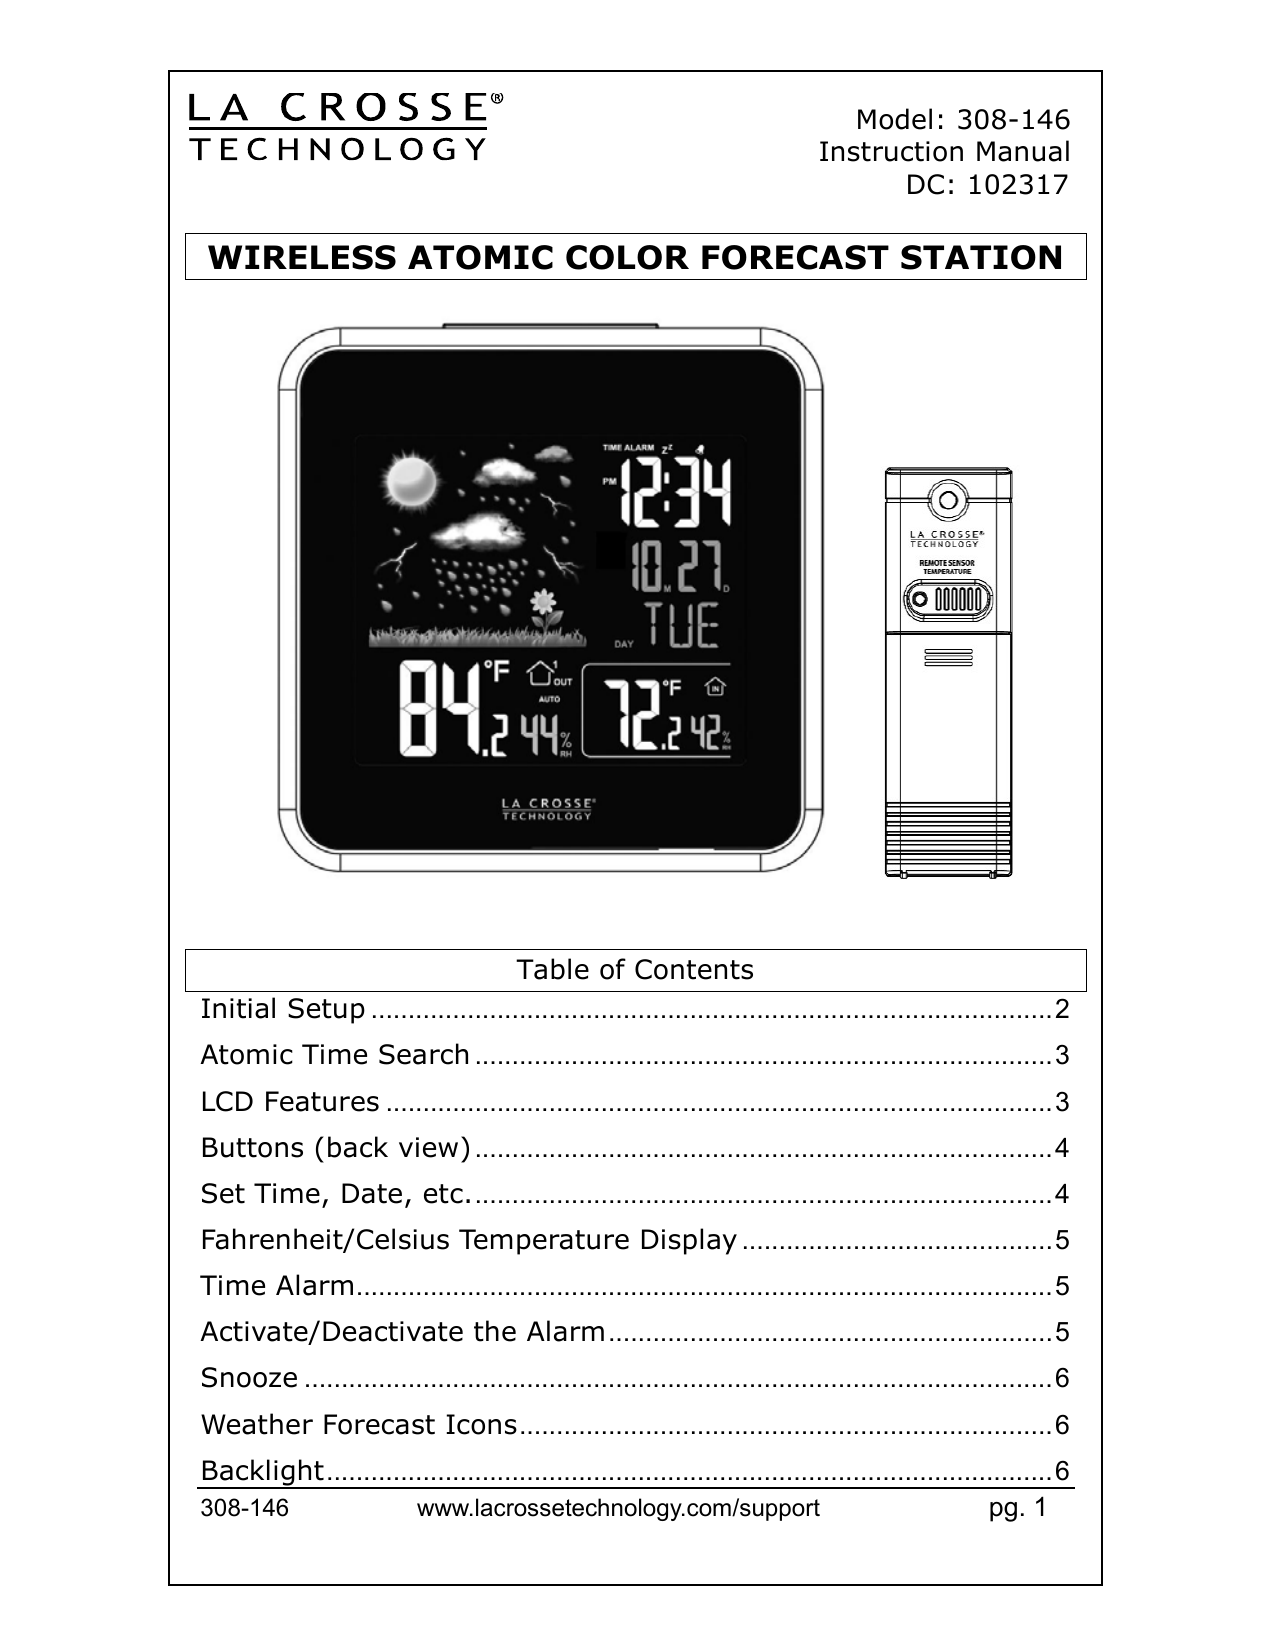 Heat Index USB Charging Port La Crosse Technology 308-146 Atomic Wireless Color Forecast Station with Dew Point